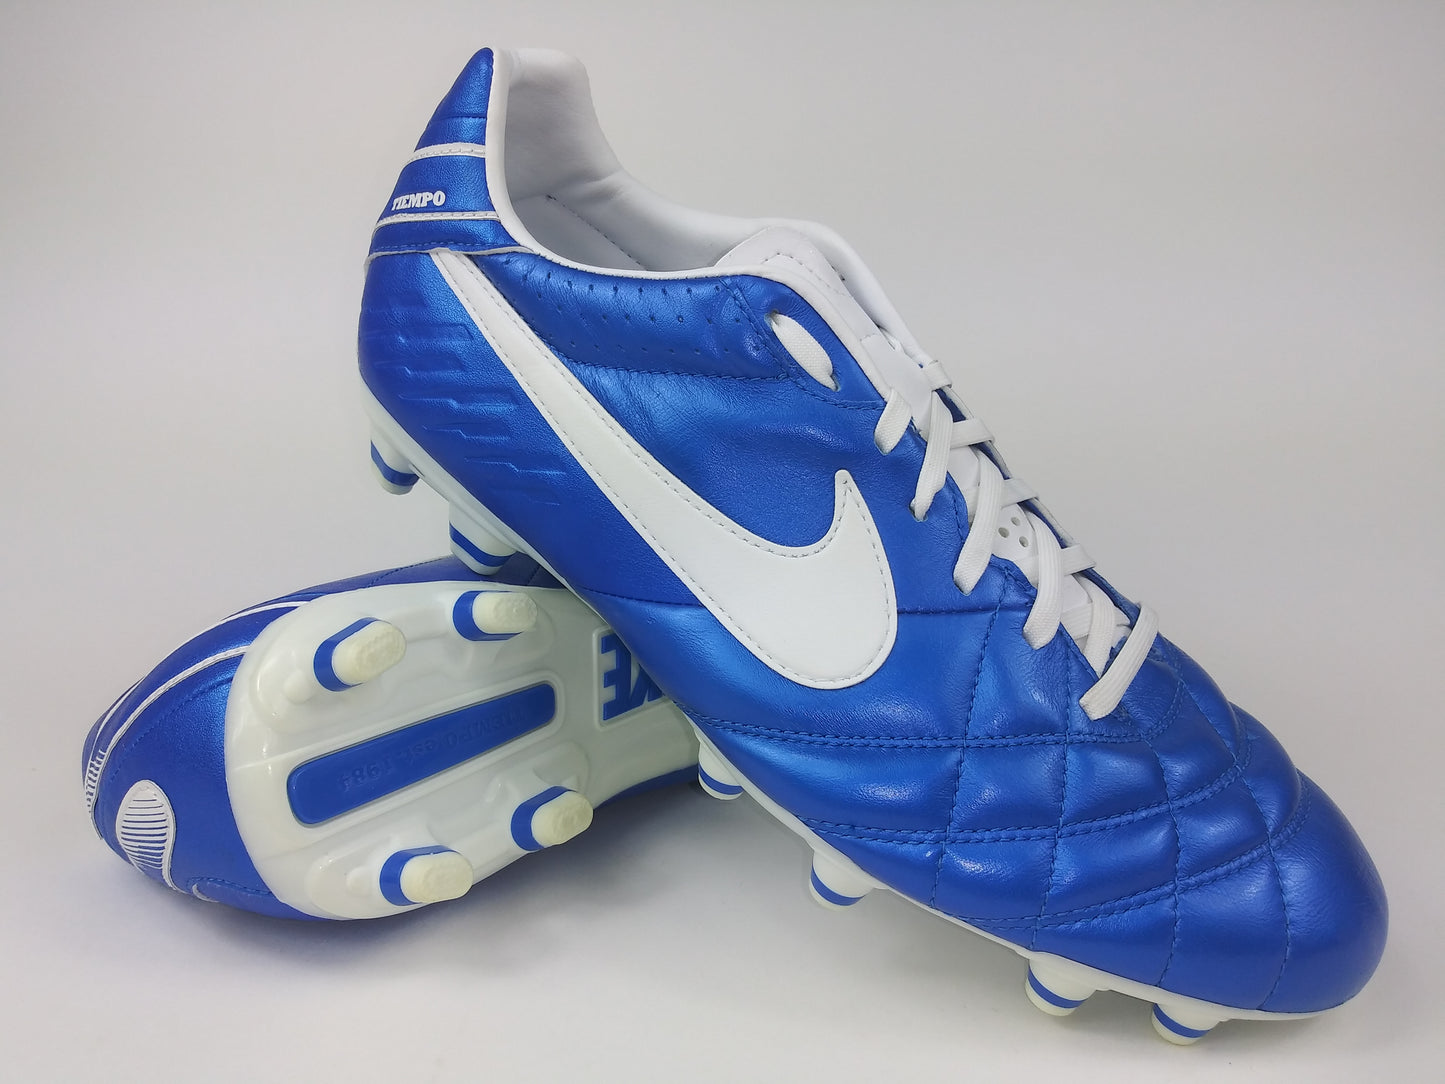 na school Vader fage Injectie Nike Tiempo Mystic IV FG Blue White – Villegas Footwear